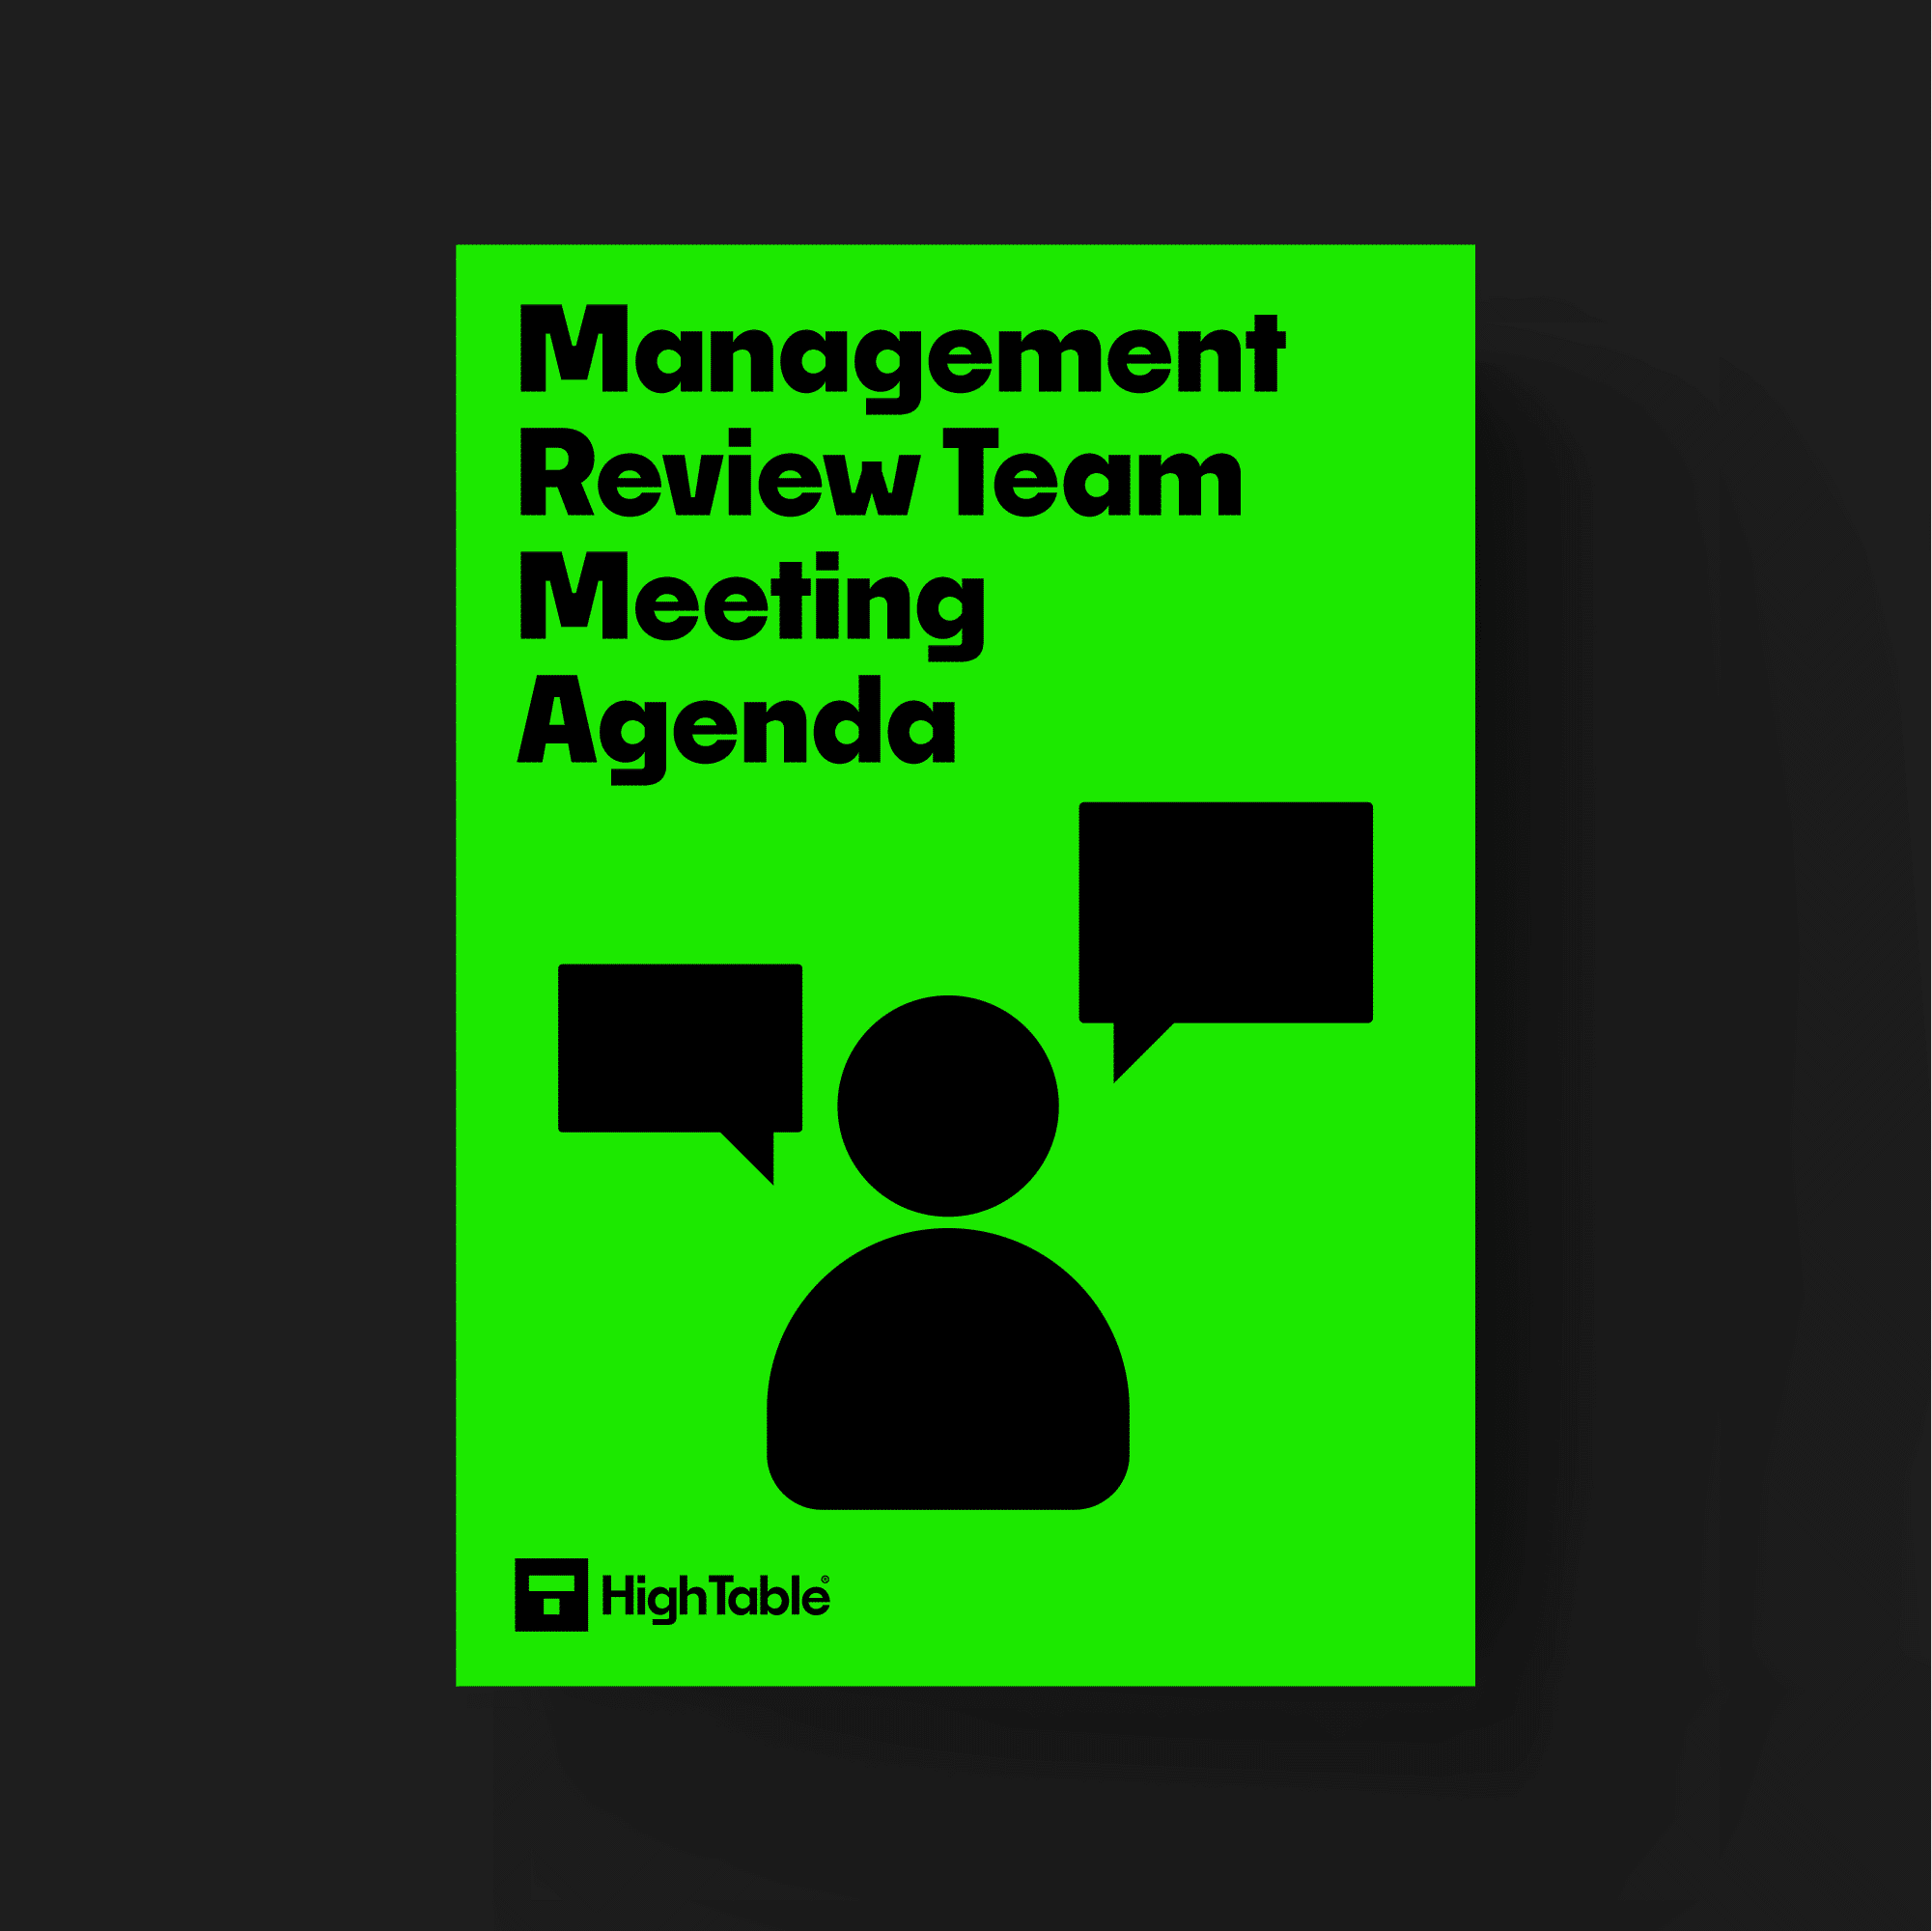 ISO 27001 Management Review Team Meeting Agenda Template